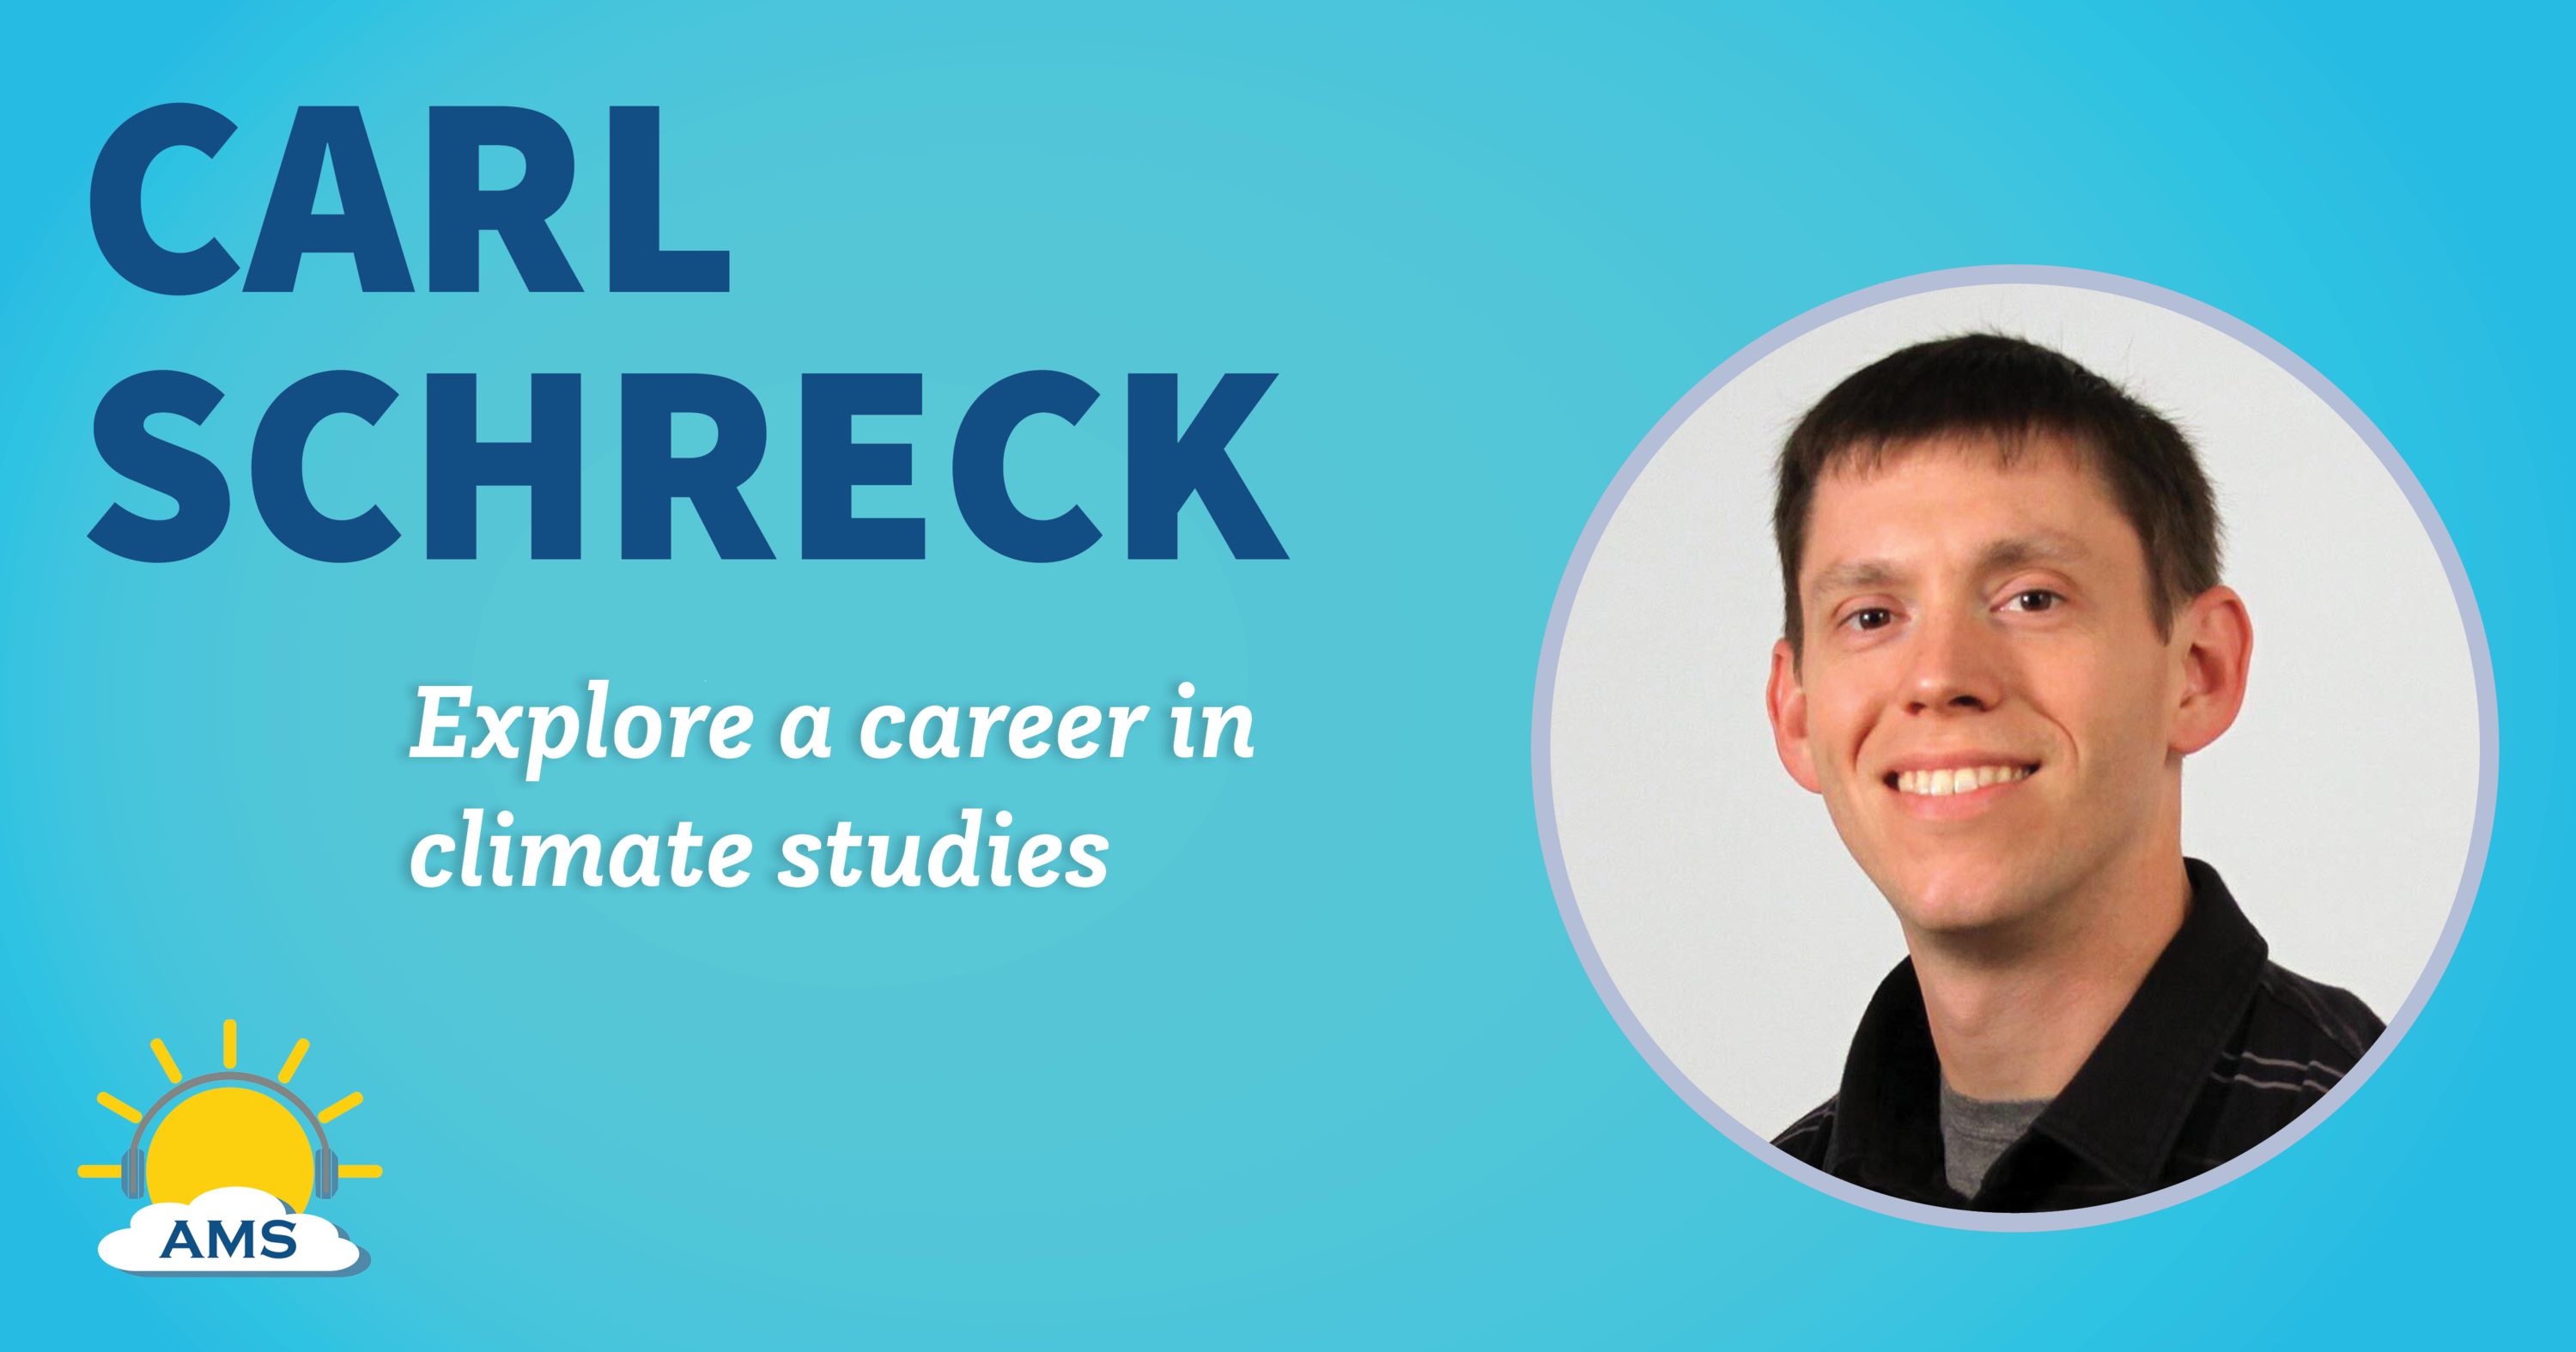 carl schreck headshot graphic with teaser text that reads &quotexplore a career in climate studies"